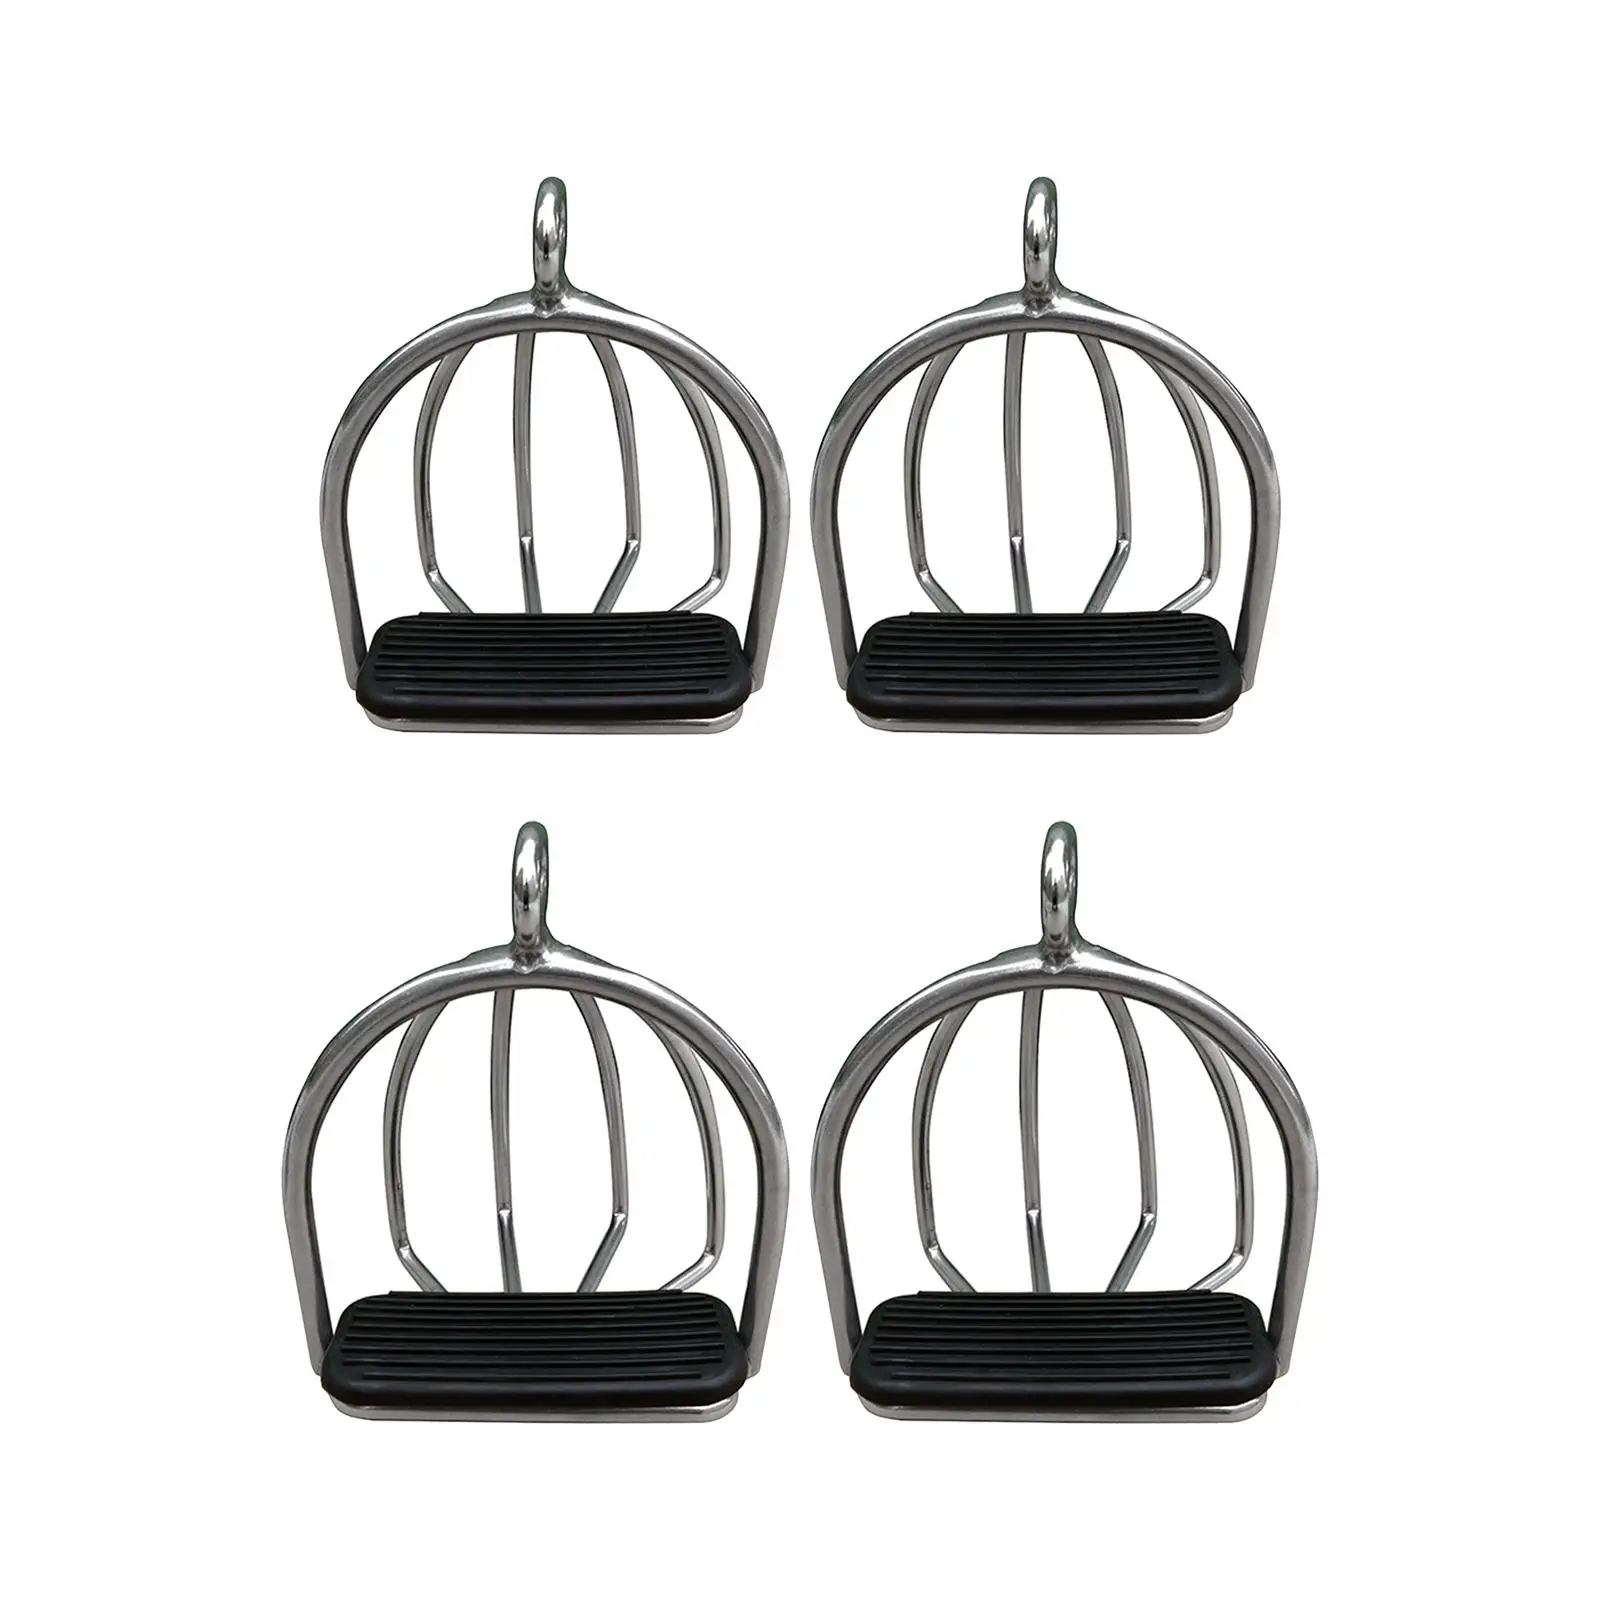 1Pair Cage Horse Riding Stirrups Steel High Strength Rubber Pad Lightweight for Safety Horse Riding Outdoor Sports Supplies Kids